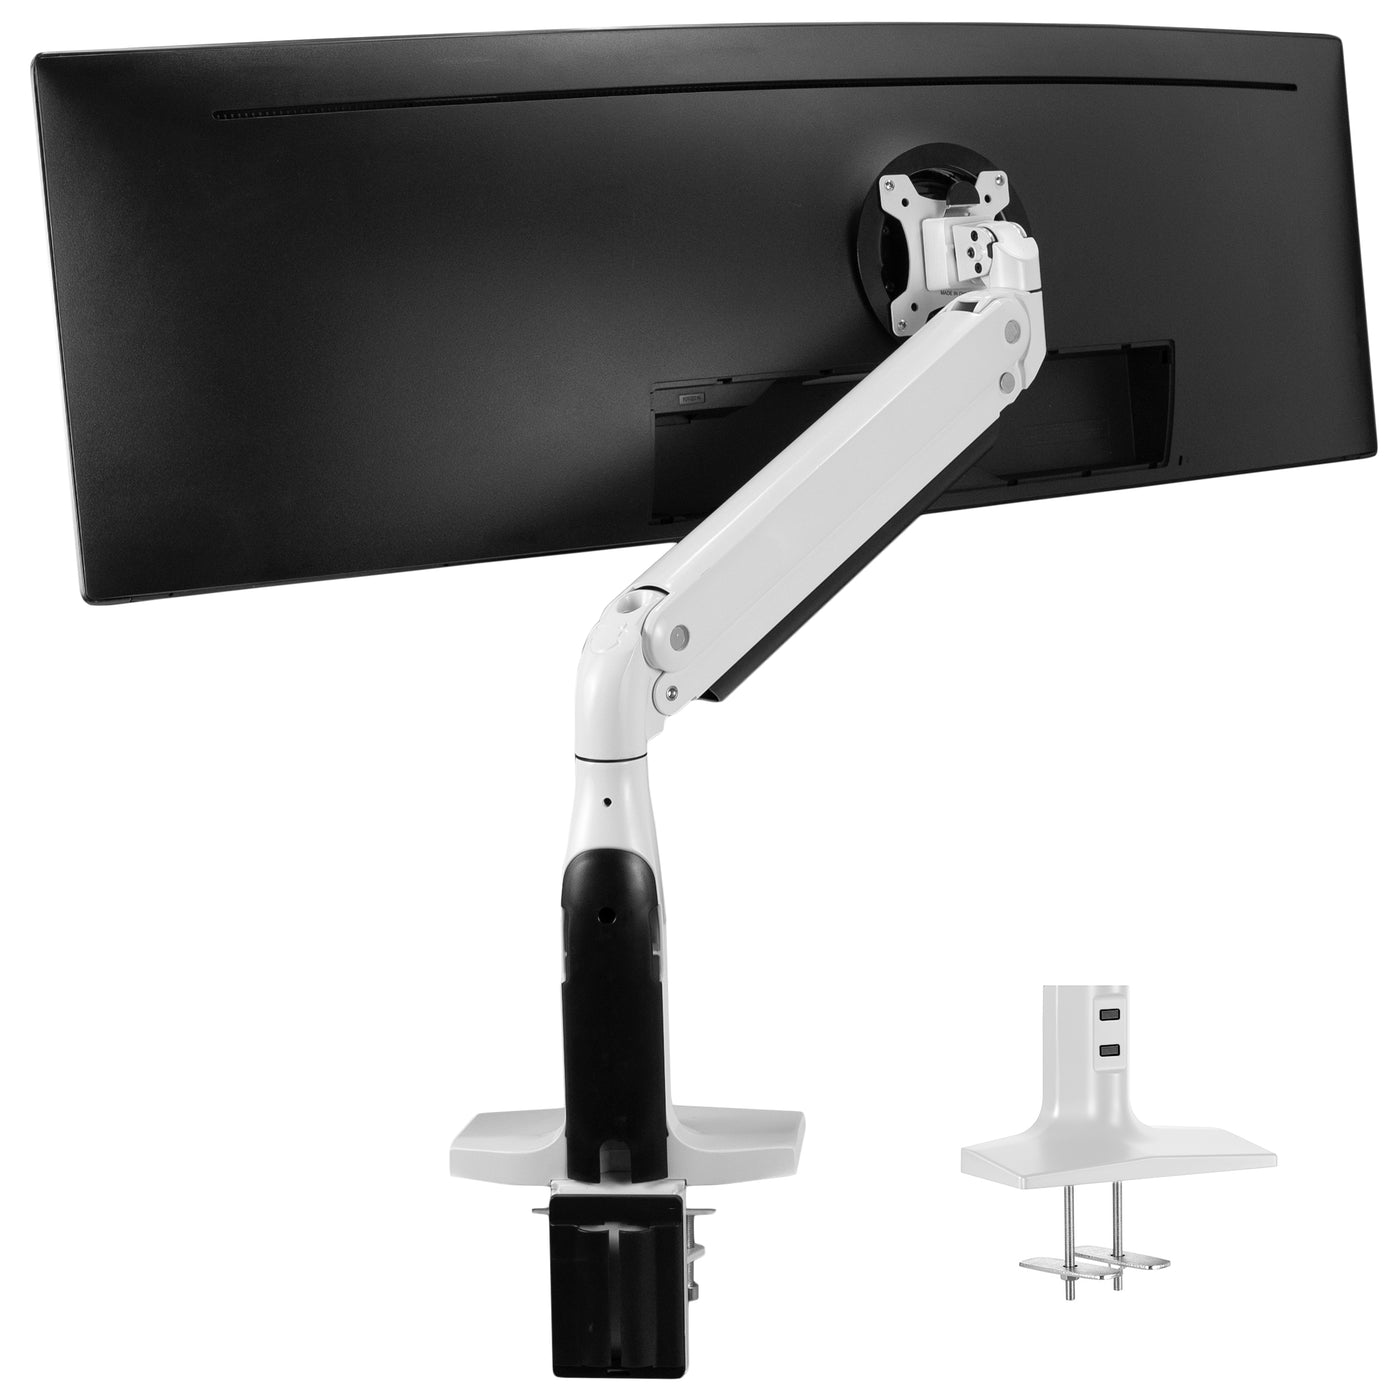 Pneumatic Arm Single Ultrawide Monitor Desk Mount – VIVO - desk solutions, screen  mounting, and more